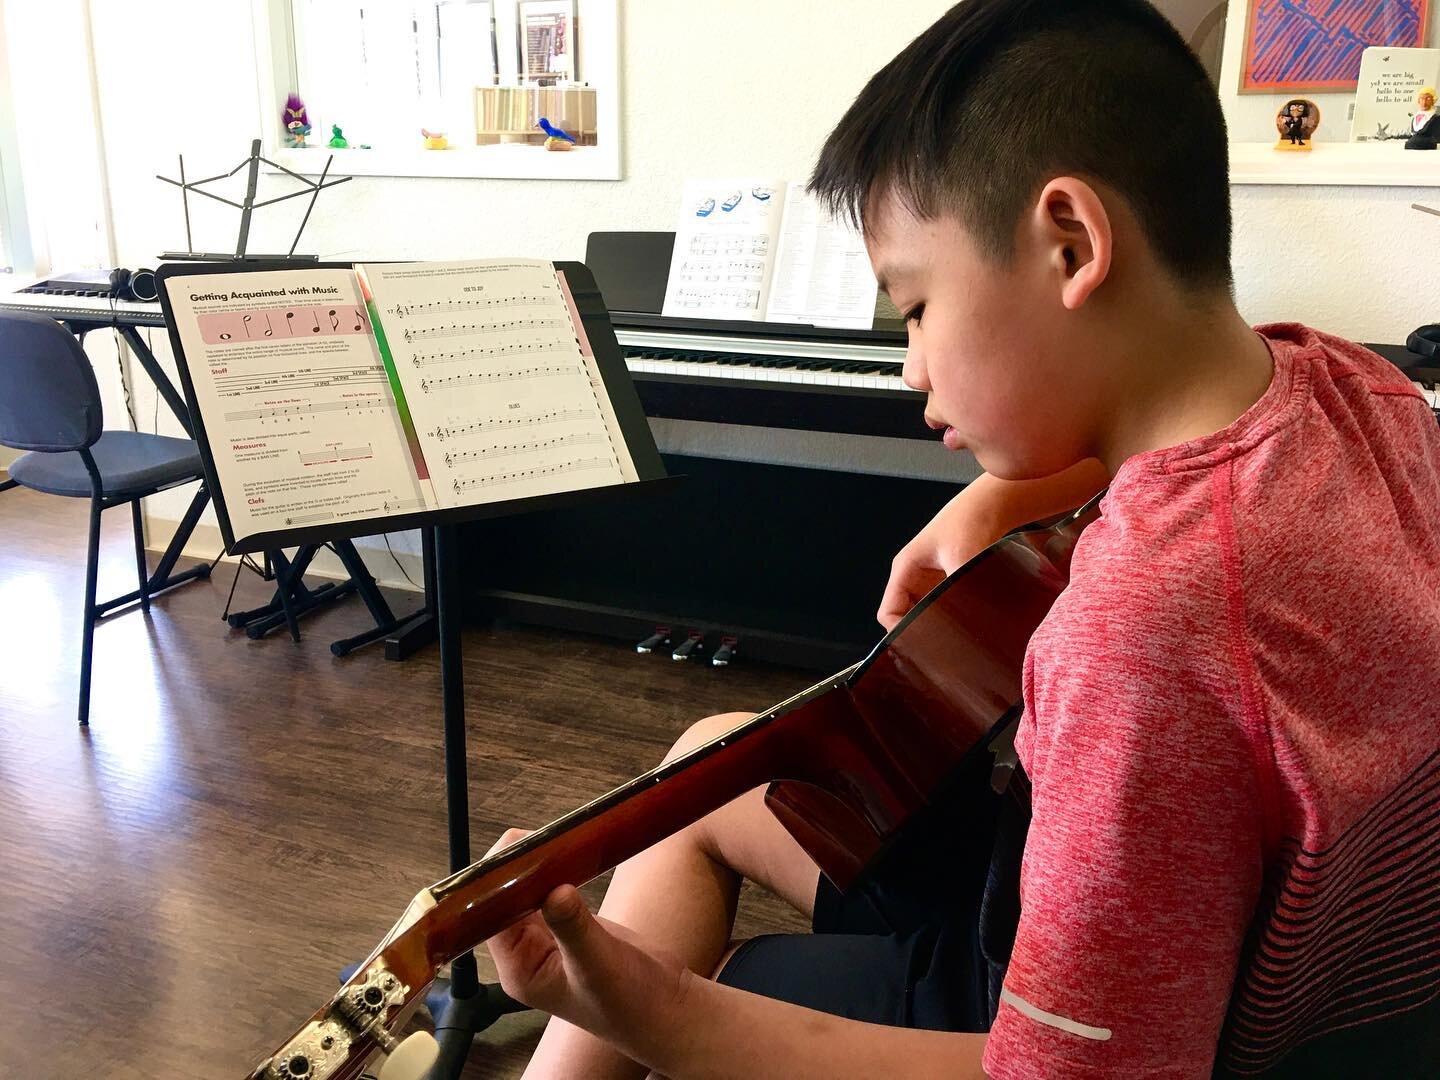 Saturday blues!  This morning at New Cottage Arts, we learned how to play the blues! This was Haydn's first try at it. 30 minutes later and we're already jammin'. Lots of talent here! 😎🎸